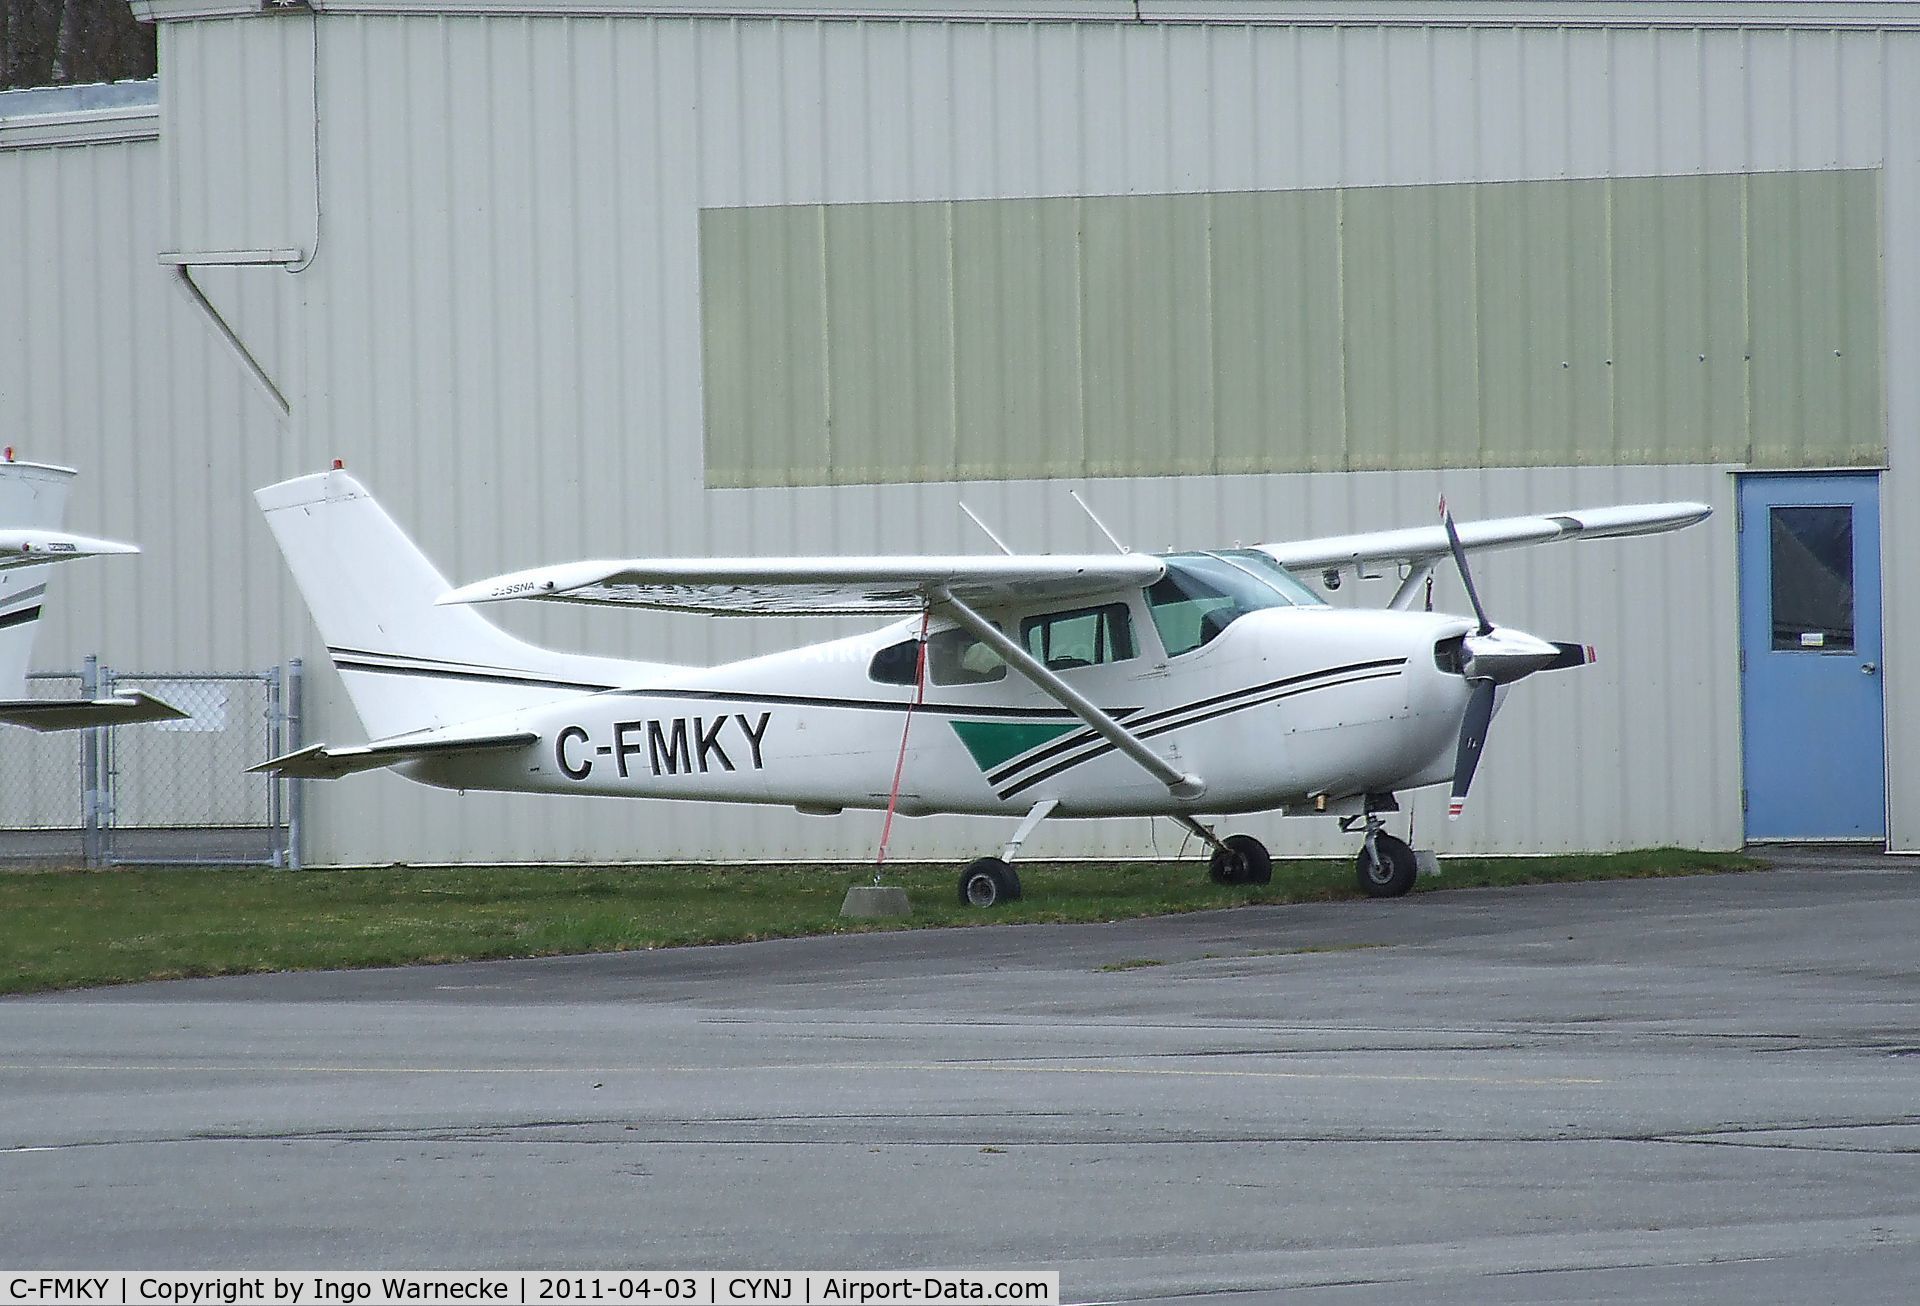 C-FMKY, 1960 Cessna 210A C/N 21057626, Cessna 210A at Langley Regional Airport, Langley BC